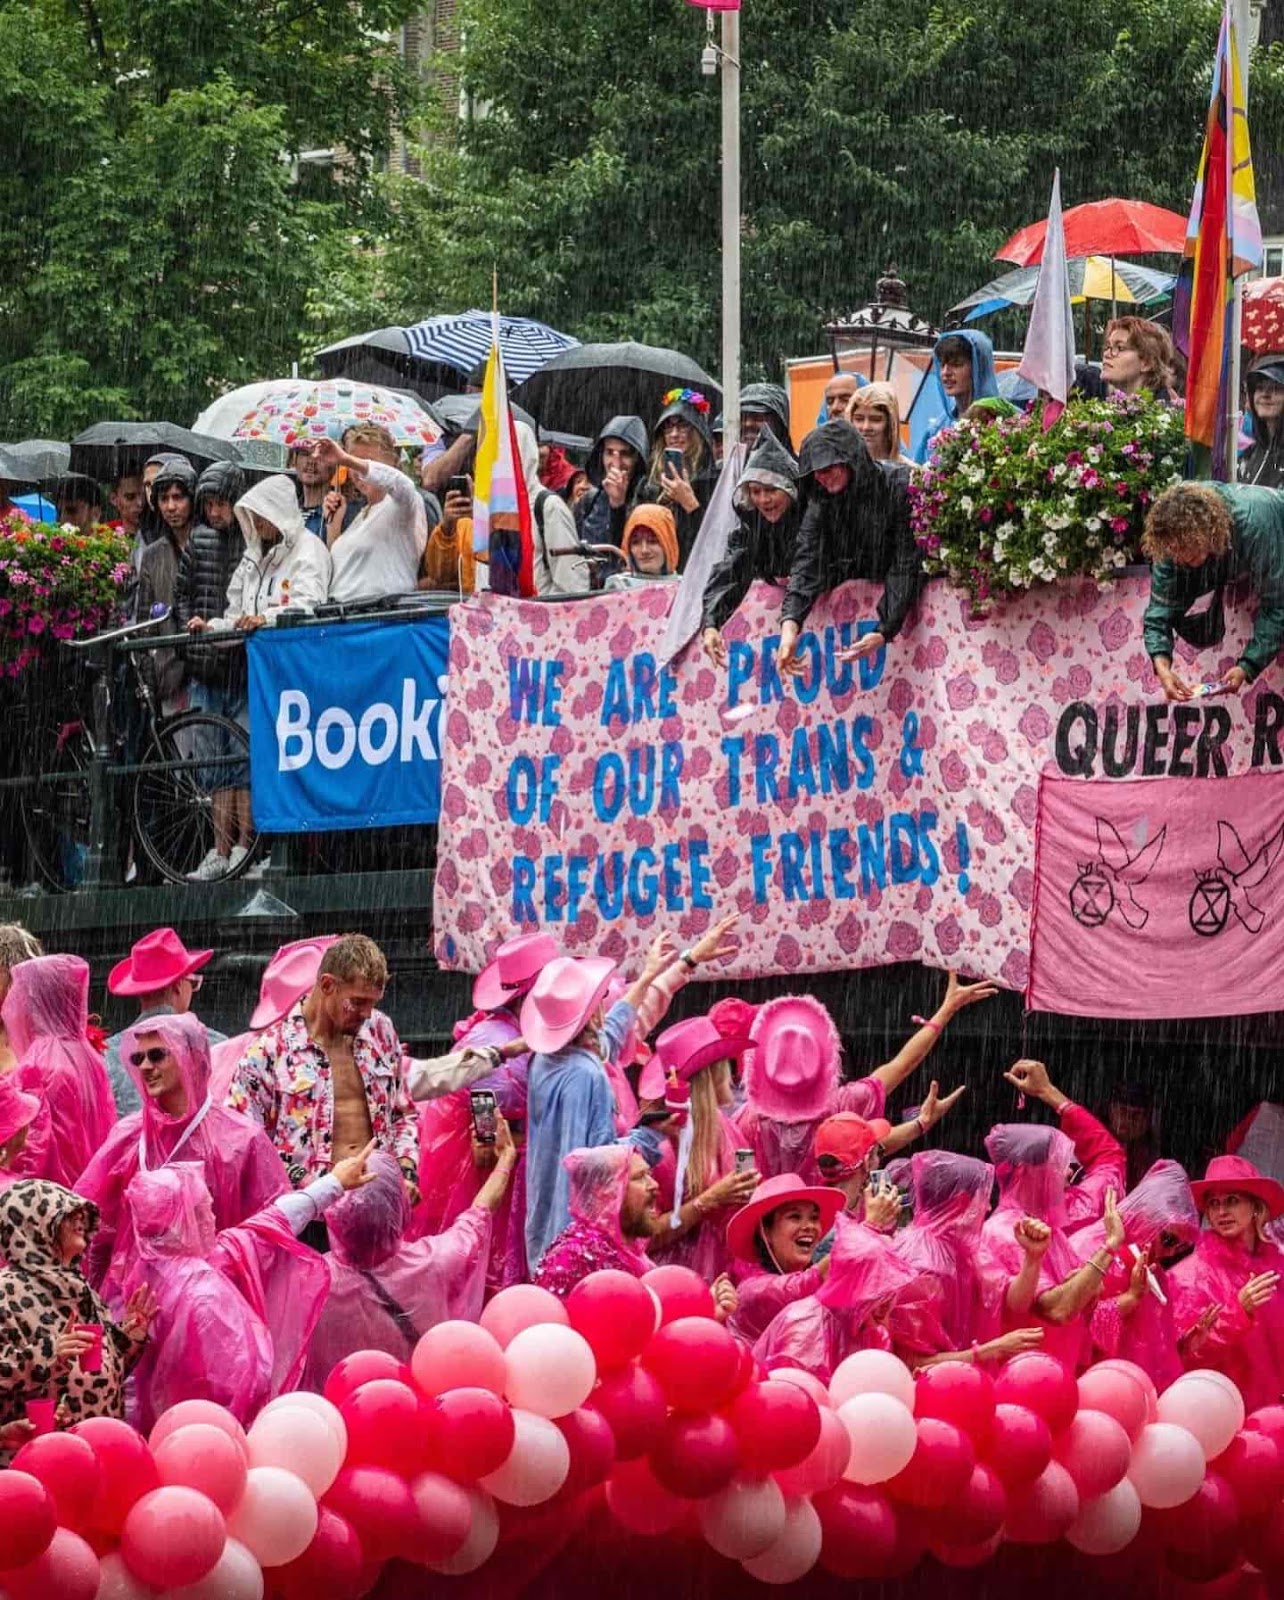 Rebels brave rain to drop a banner over a bridge as people in pink party below on a canal barge